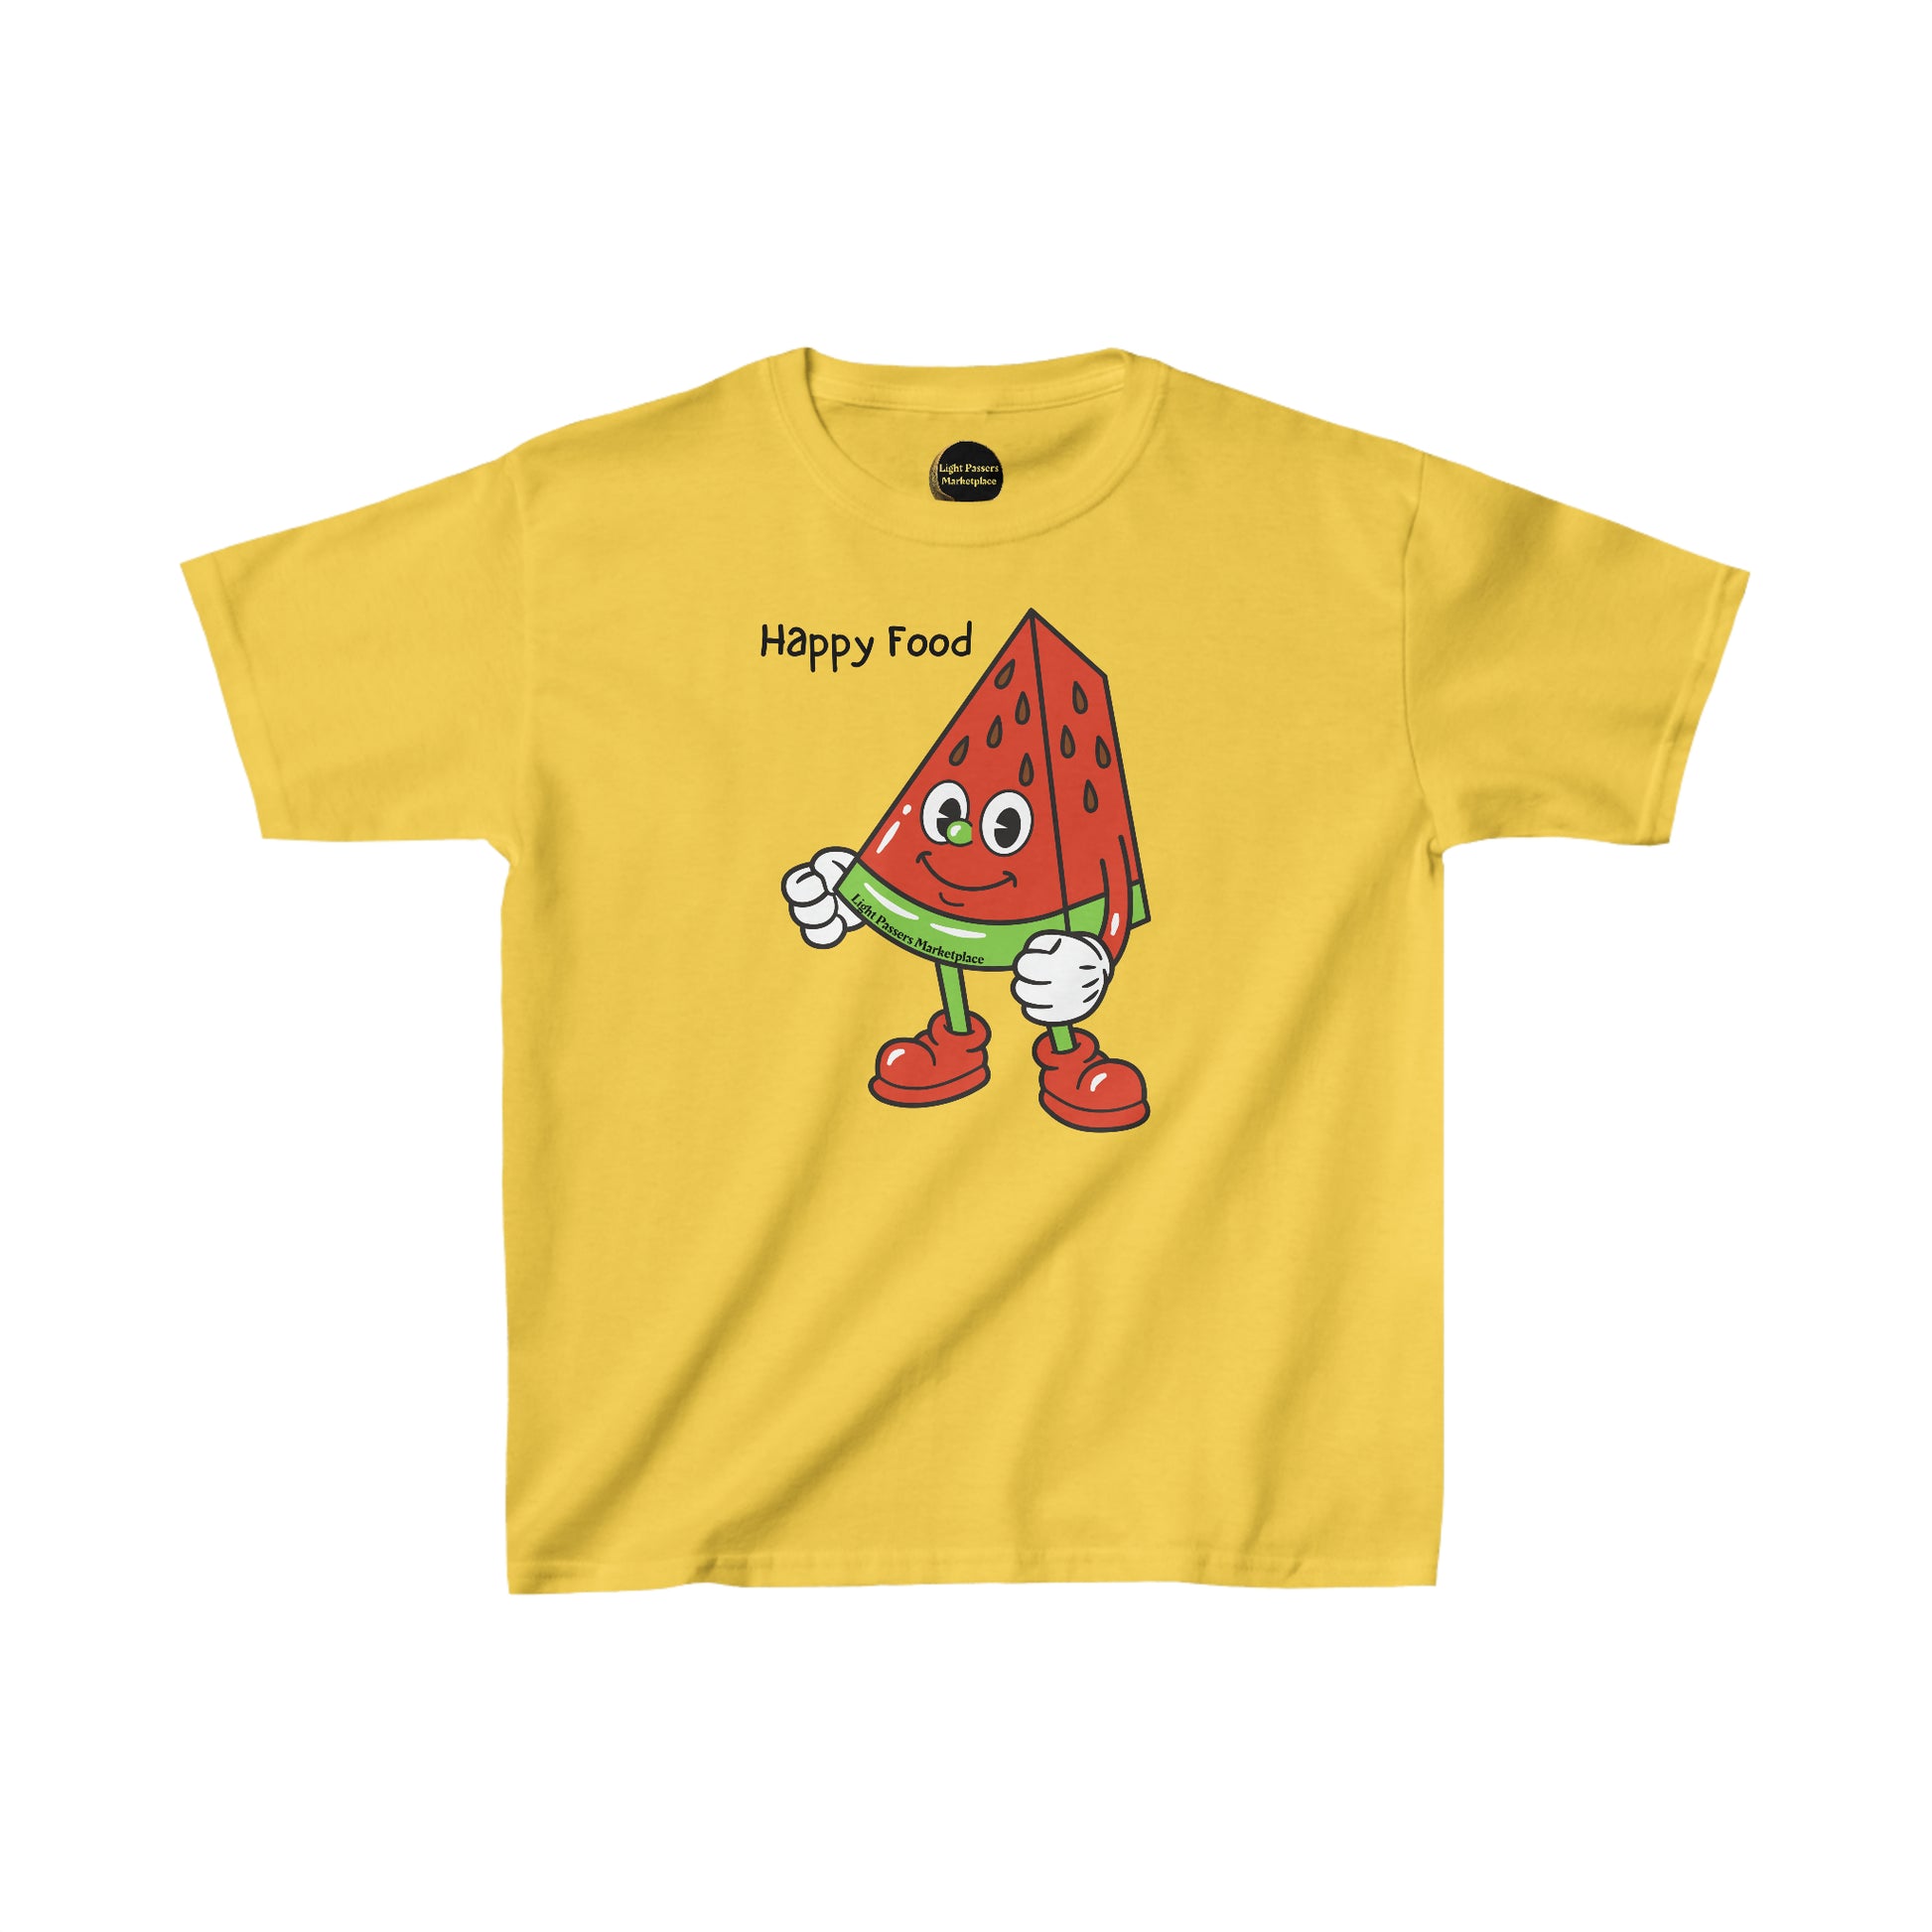 Youth yellow t-shirt featuring a cartoon watermelon design and a fist graphic. Made of 100% cotton with twill tape shoulders and ribbed collar for durability and comfort.